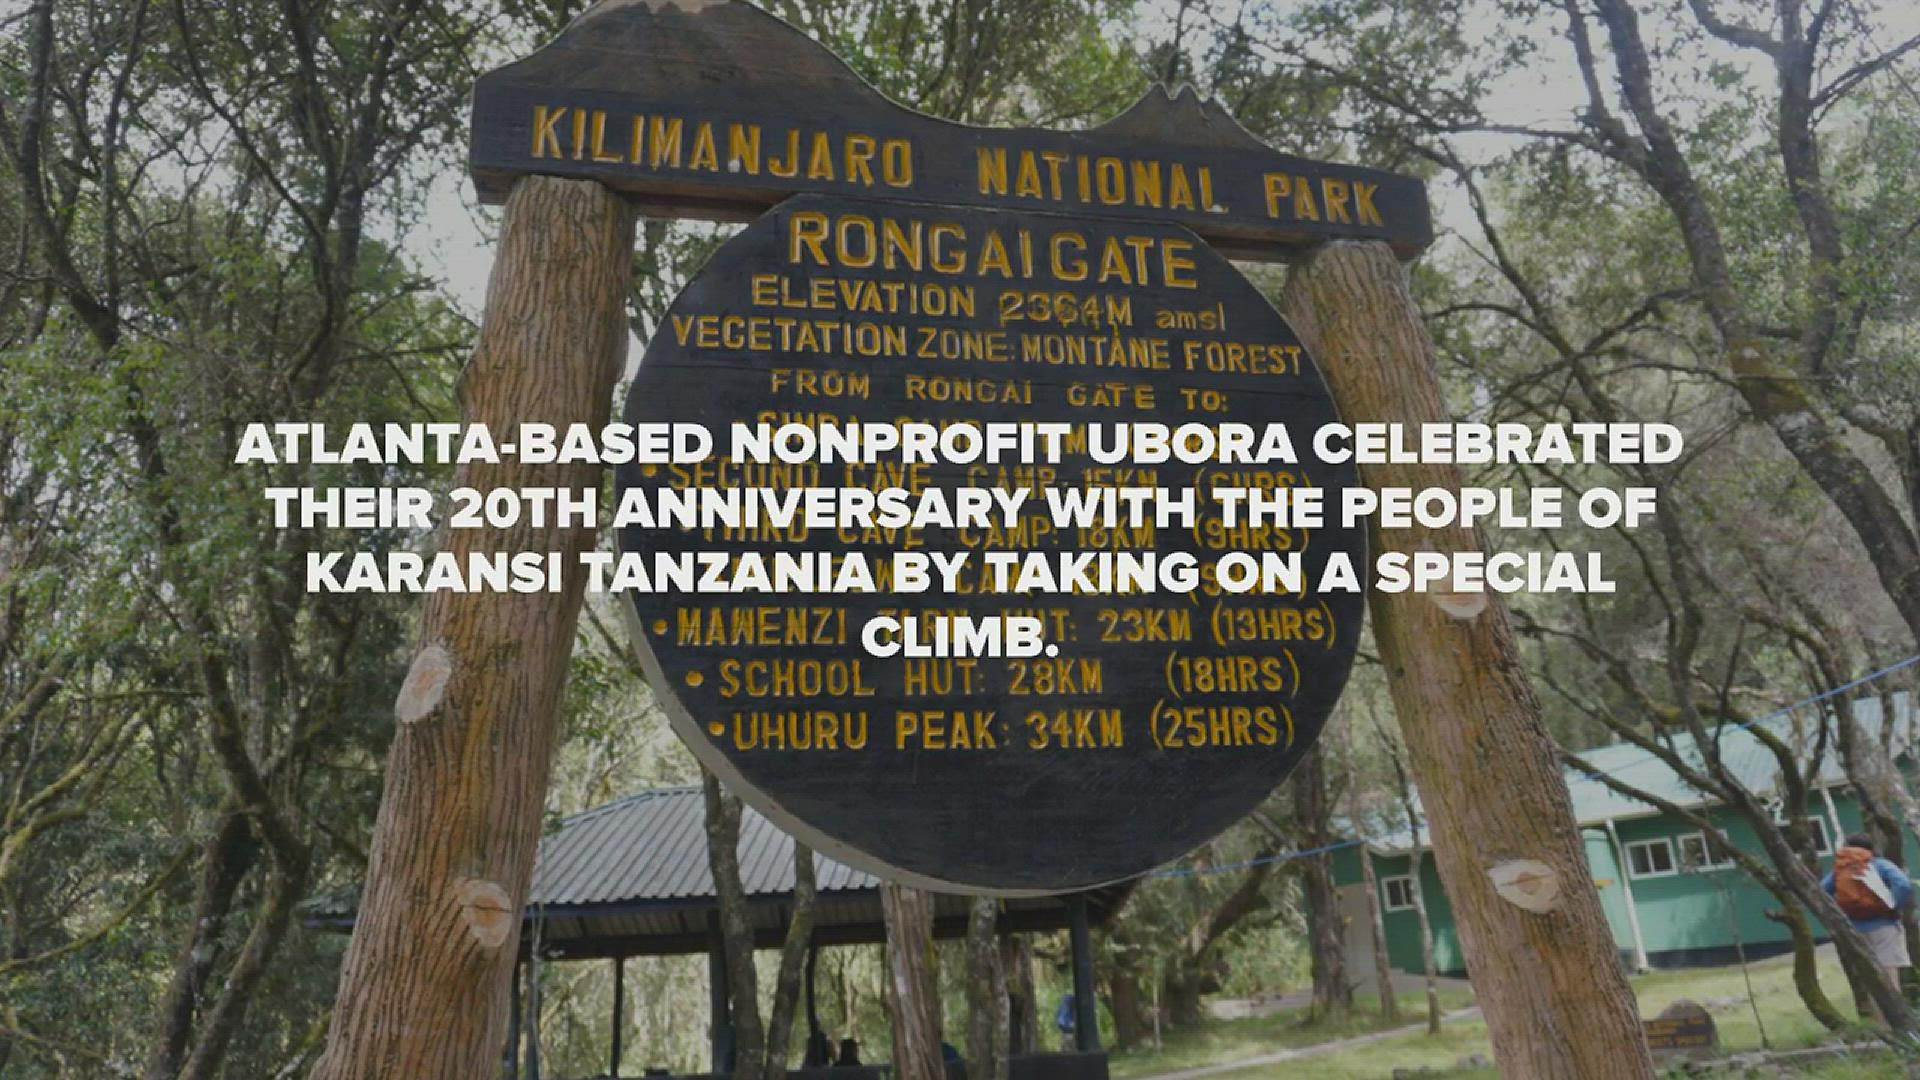 To further celebrate the collaboration between the two communities, Ubora volunteers climbed Mount Kilimanjaro during a six-day ascent of the mountain.